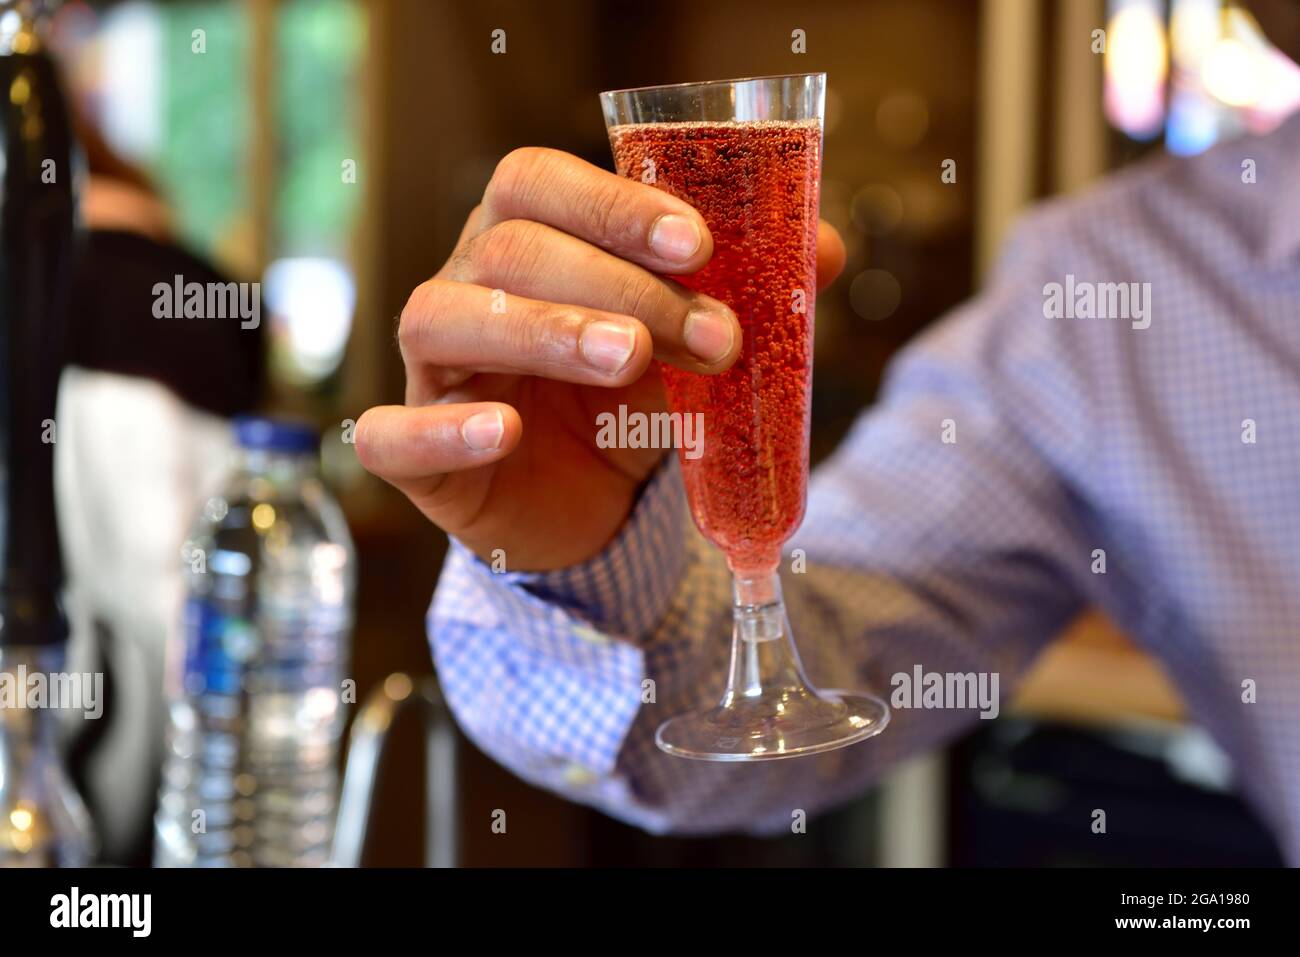 Man's hand holding up a glass of bubbly Champaign or wine Stock Photo